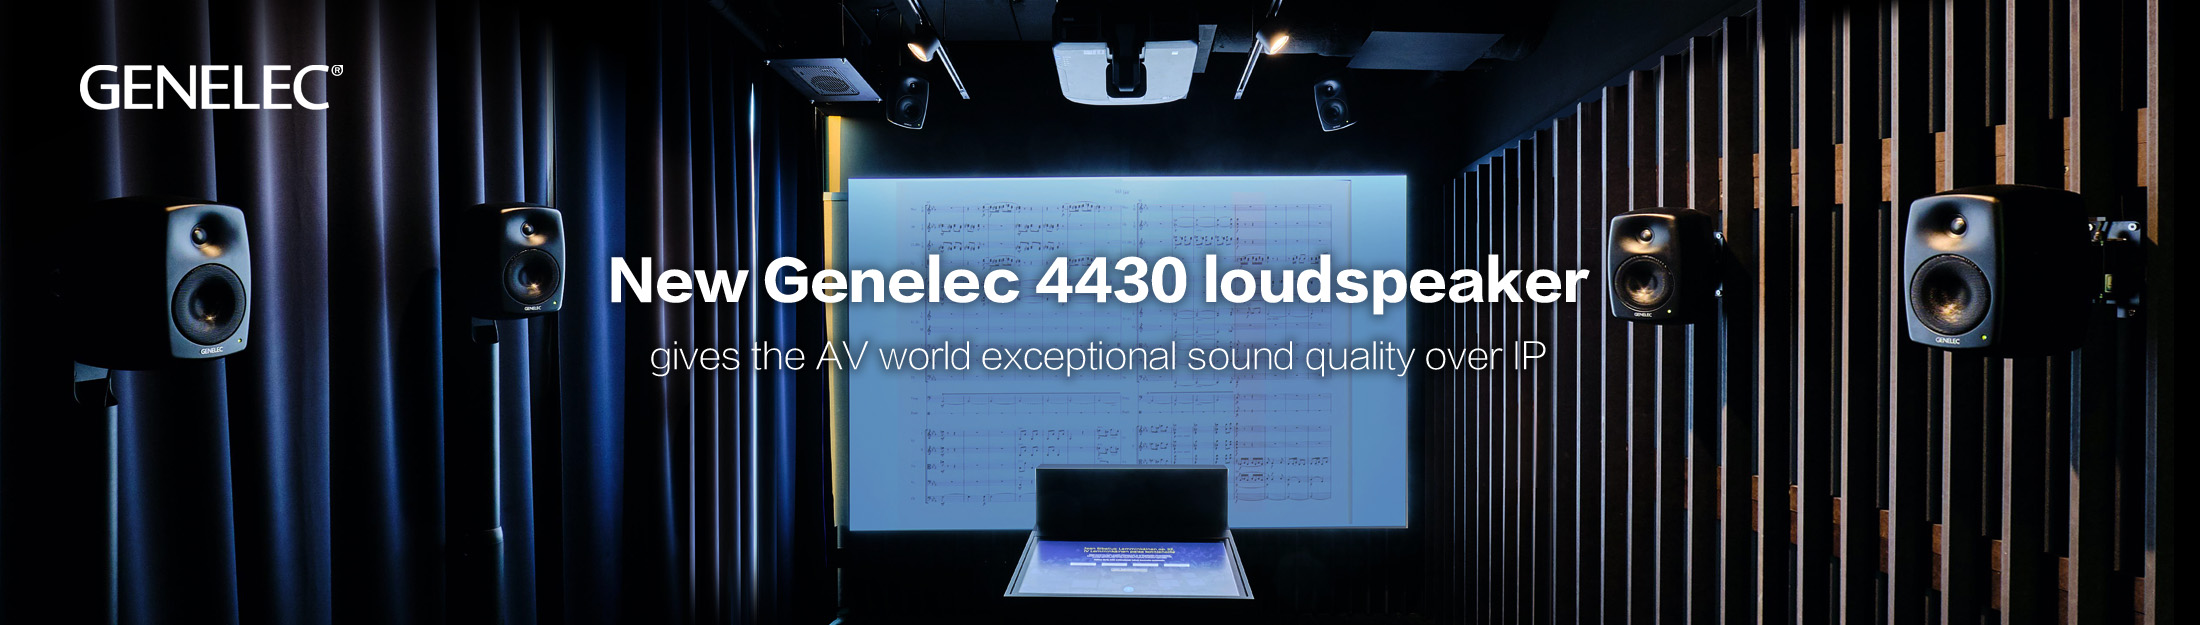 New Genelec 4430 loudspeaker gives the AV world exceptional sound quality over IP